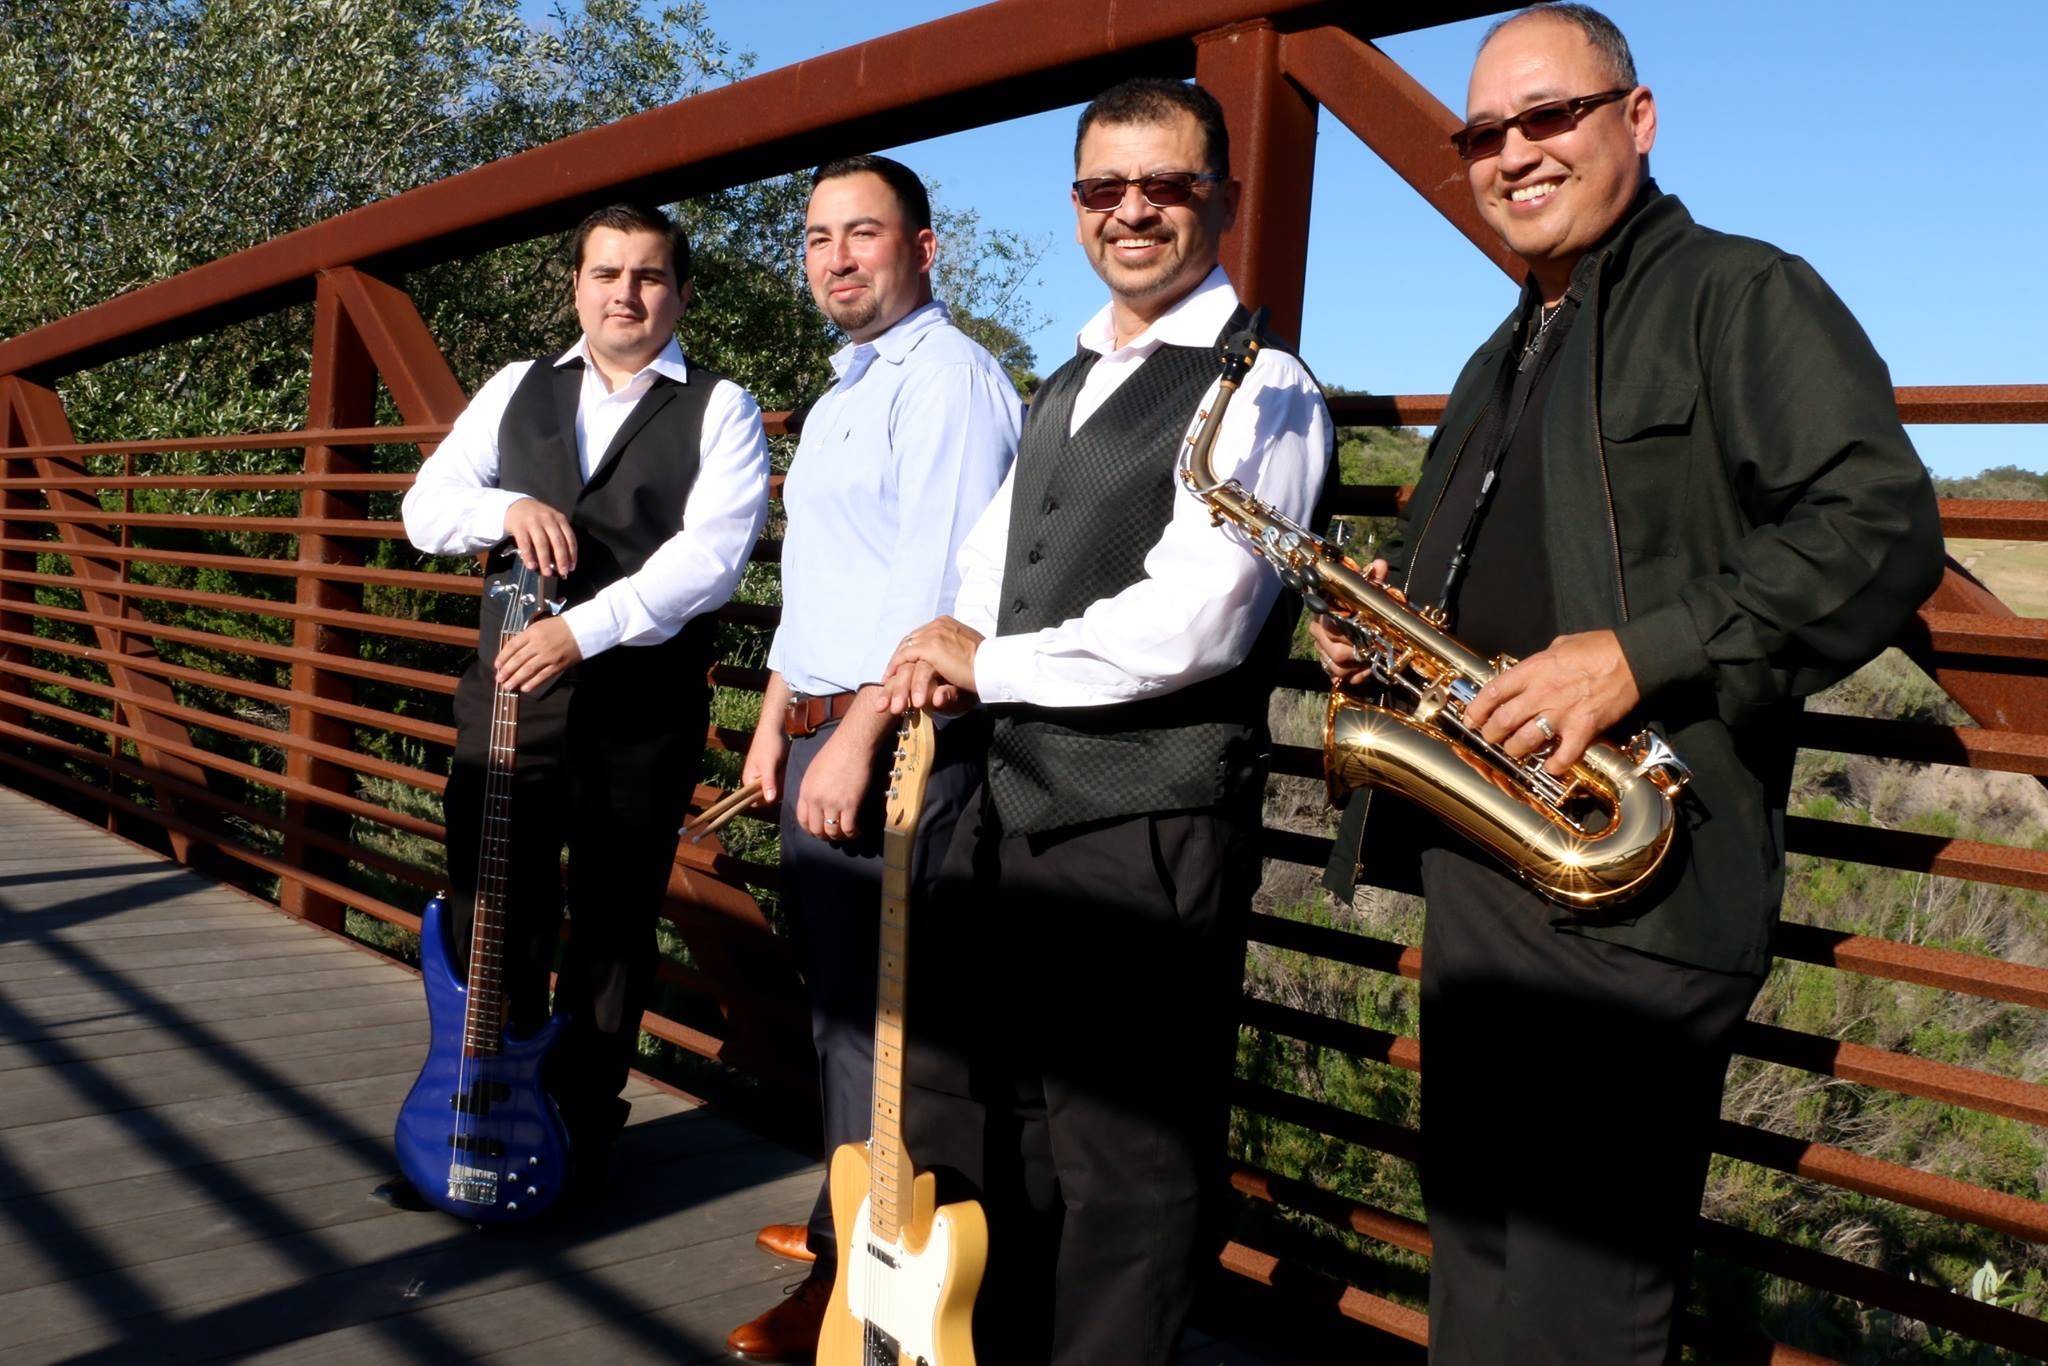 Concerts in the Park in Santa Maria features local groups performing